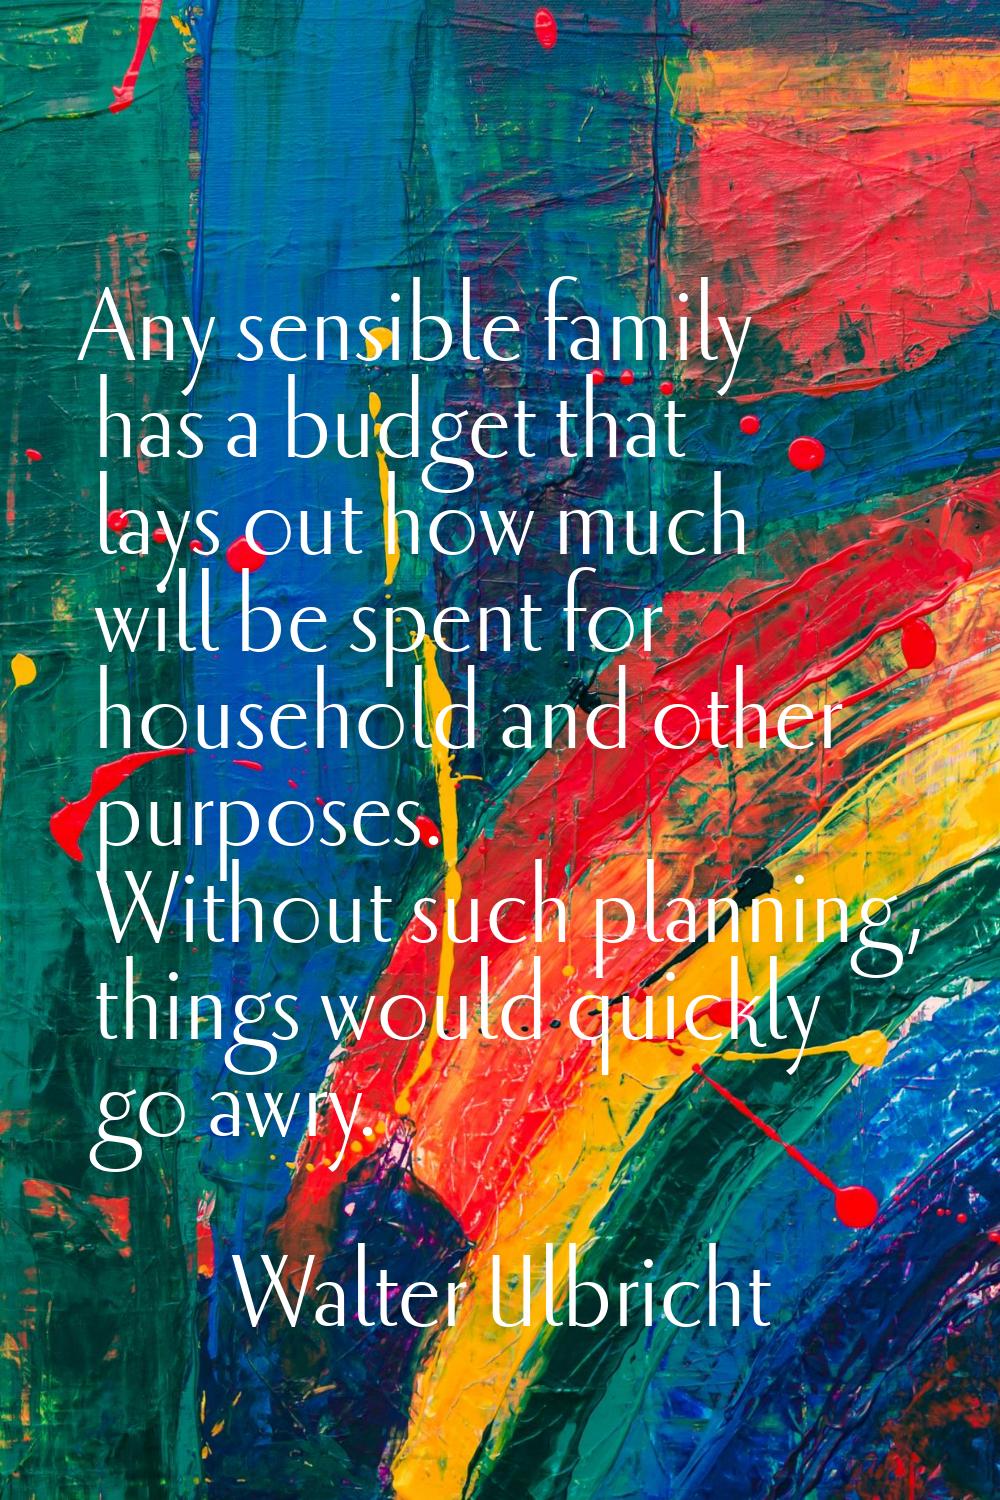 Any sensible family has a budget that lays out how much will be spent for household and other purpo